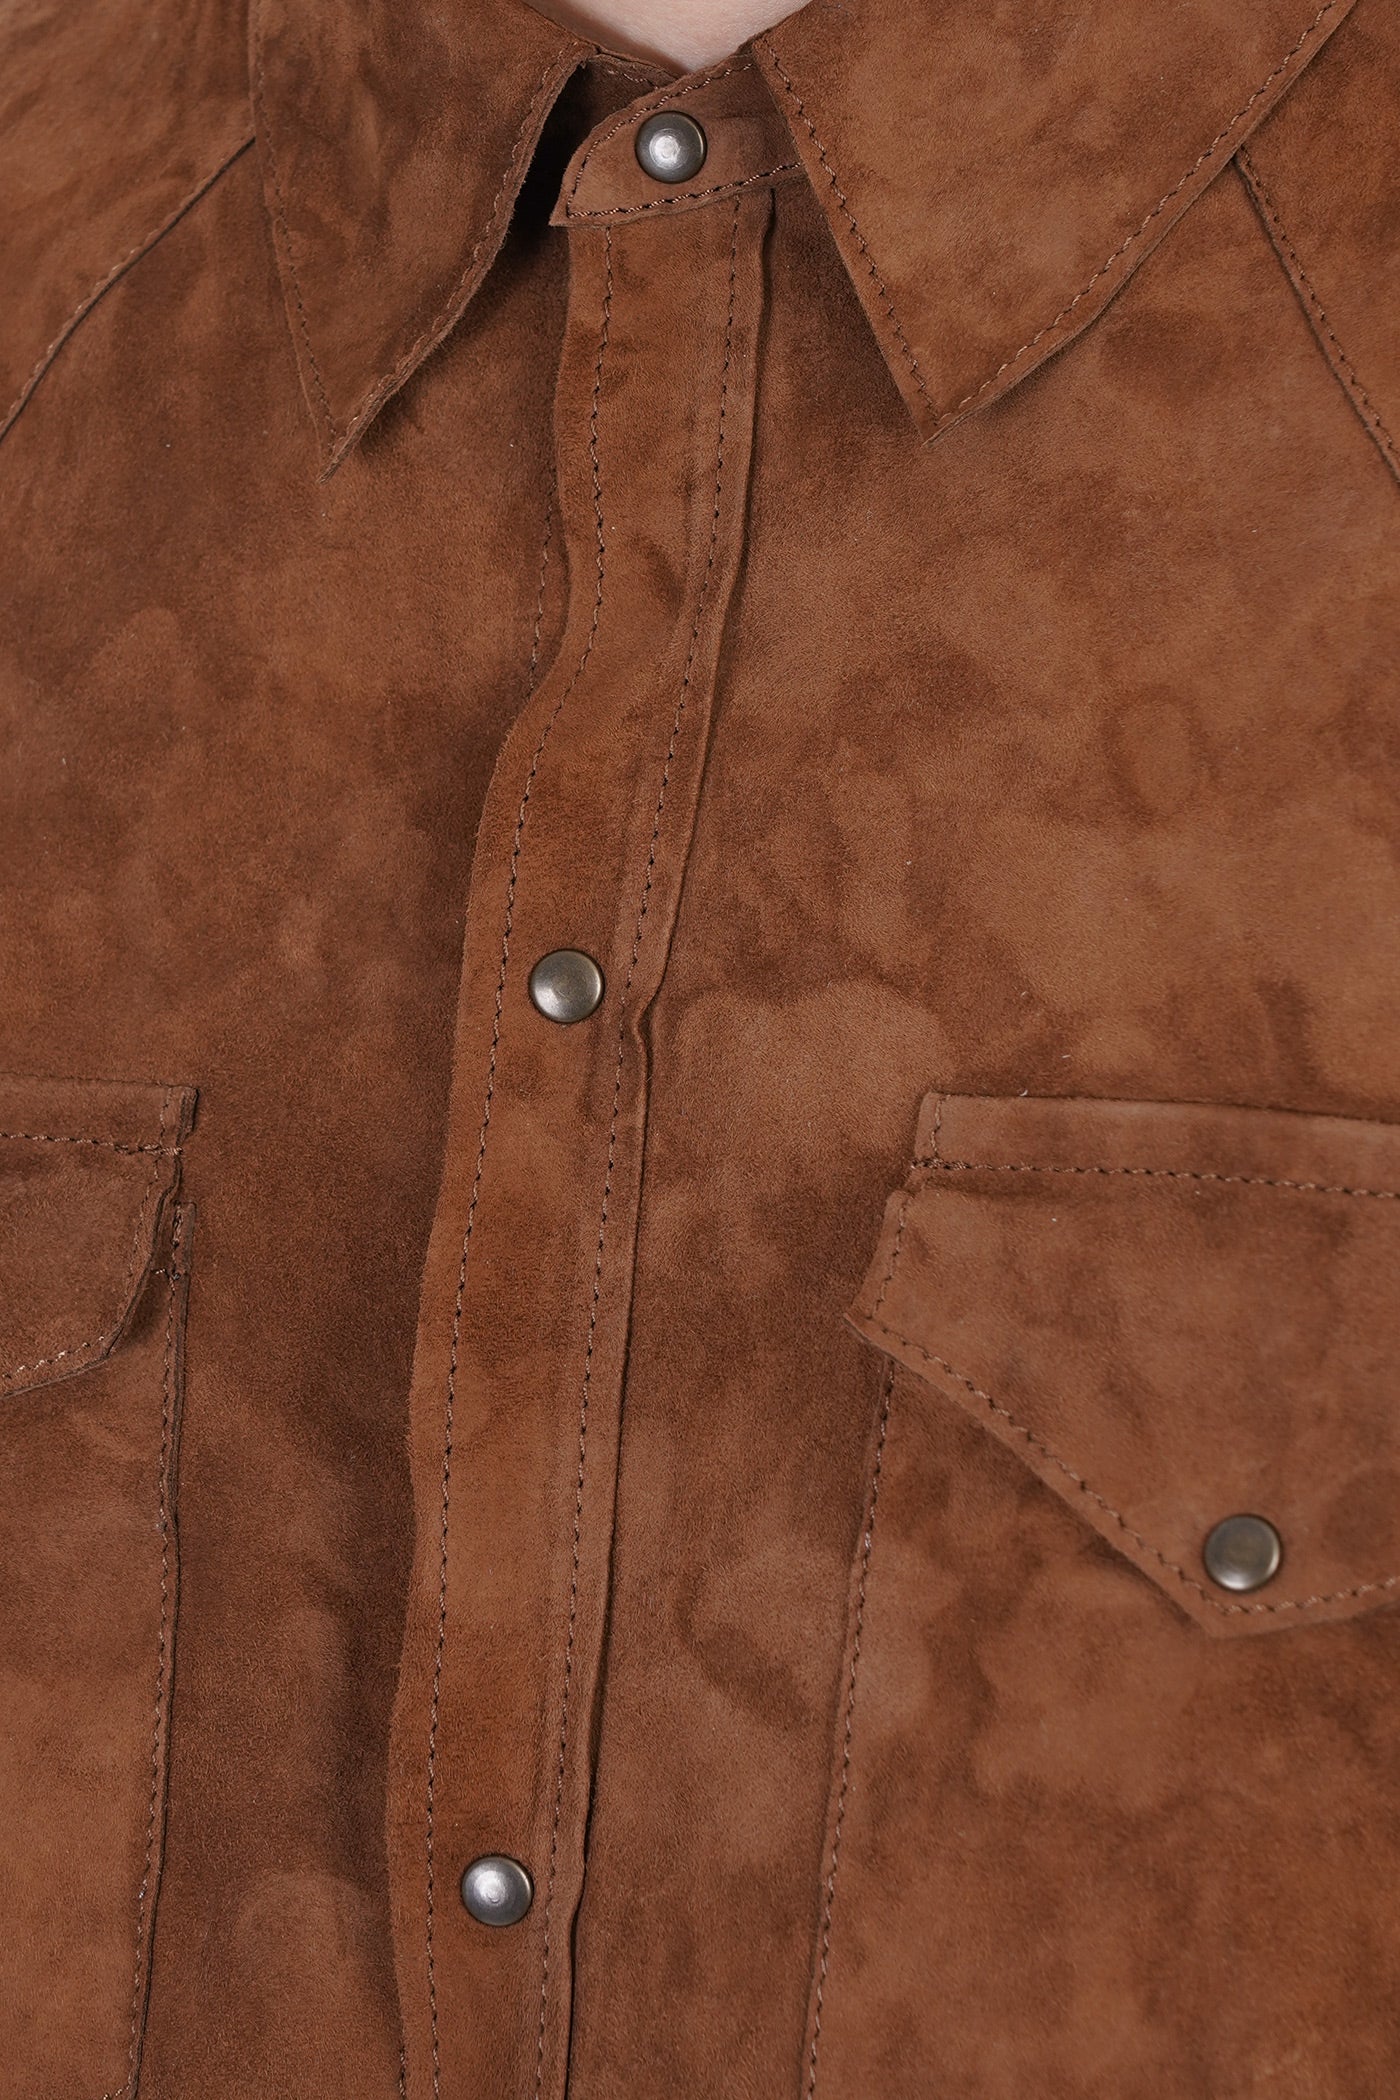 Men’s Tan Brown Suede Leather Shirt